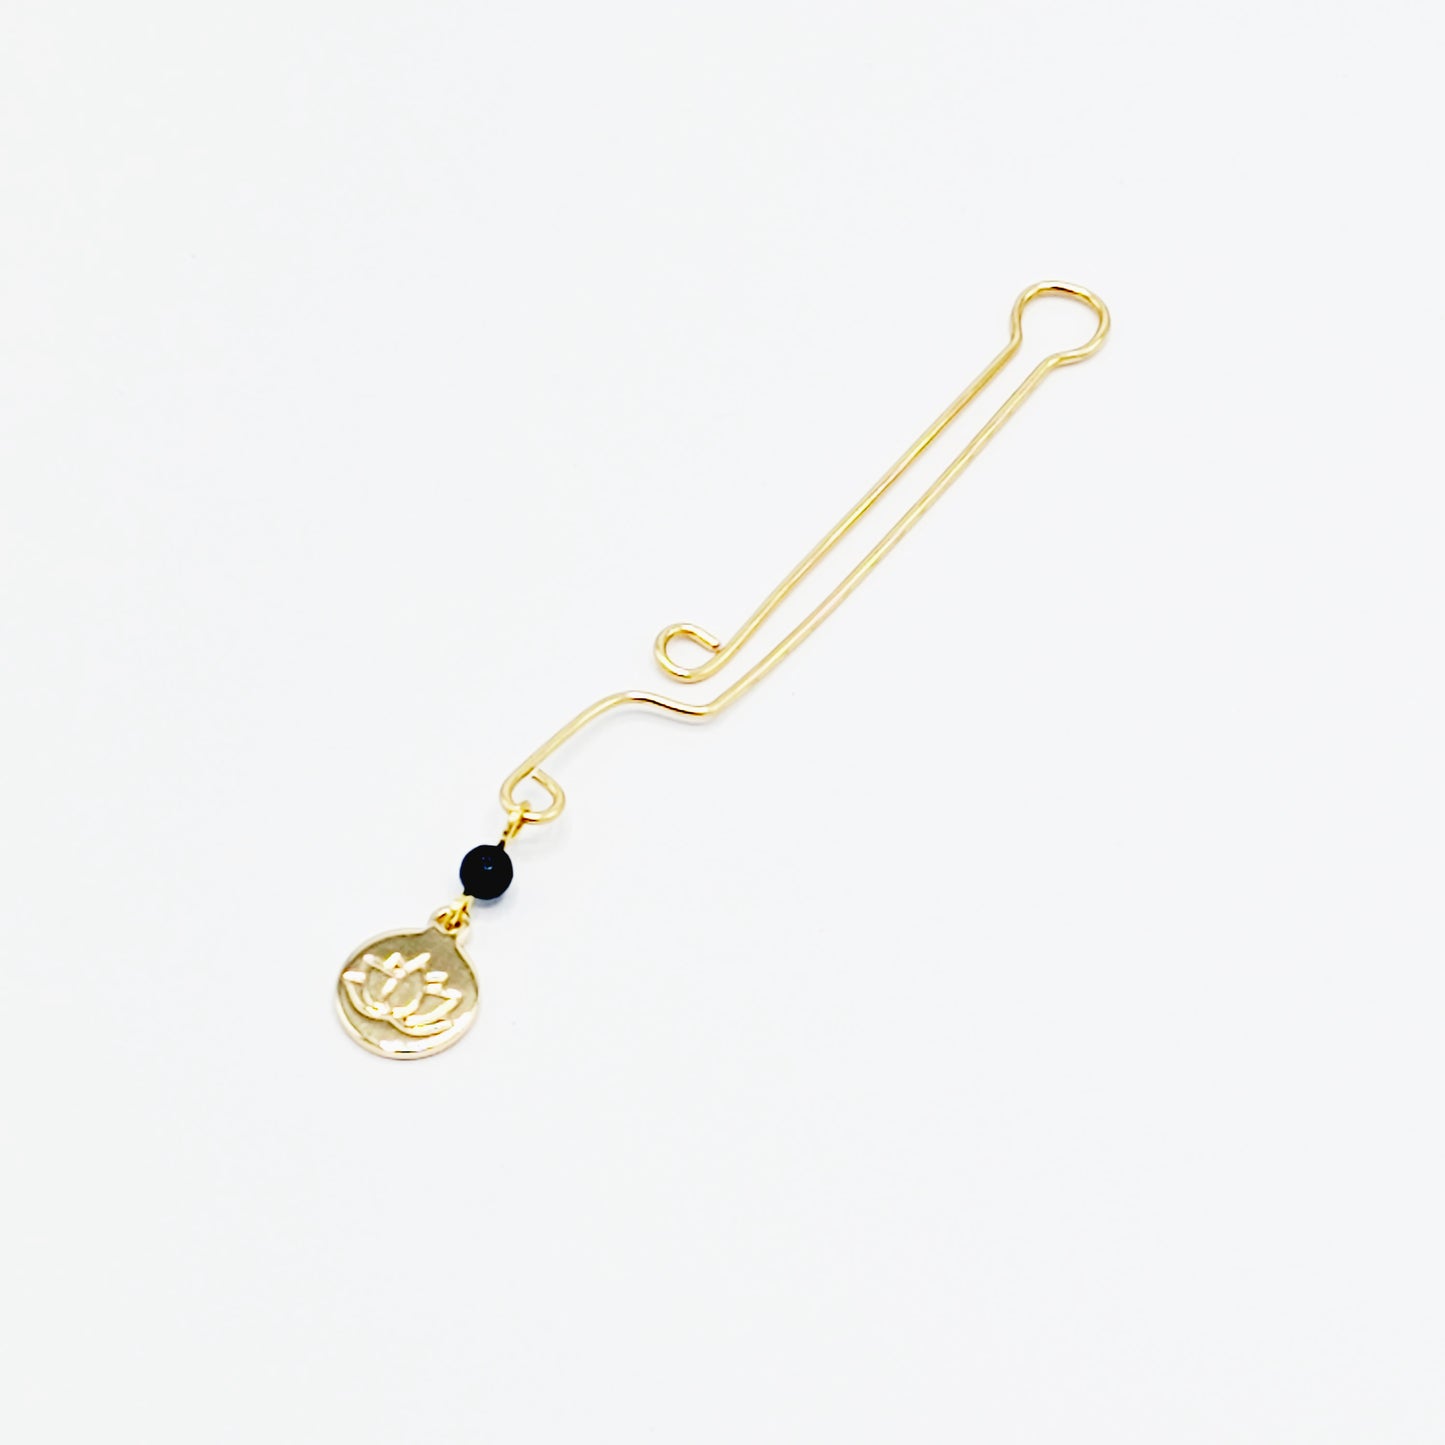 Gold Labia Clip with 18k Gold Lotus Flower. Non Piercing Clit and Labia Genital Jewelry.